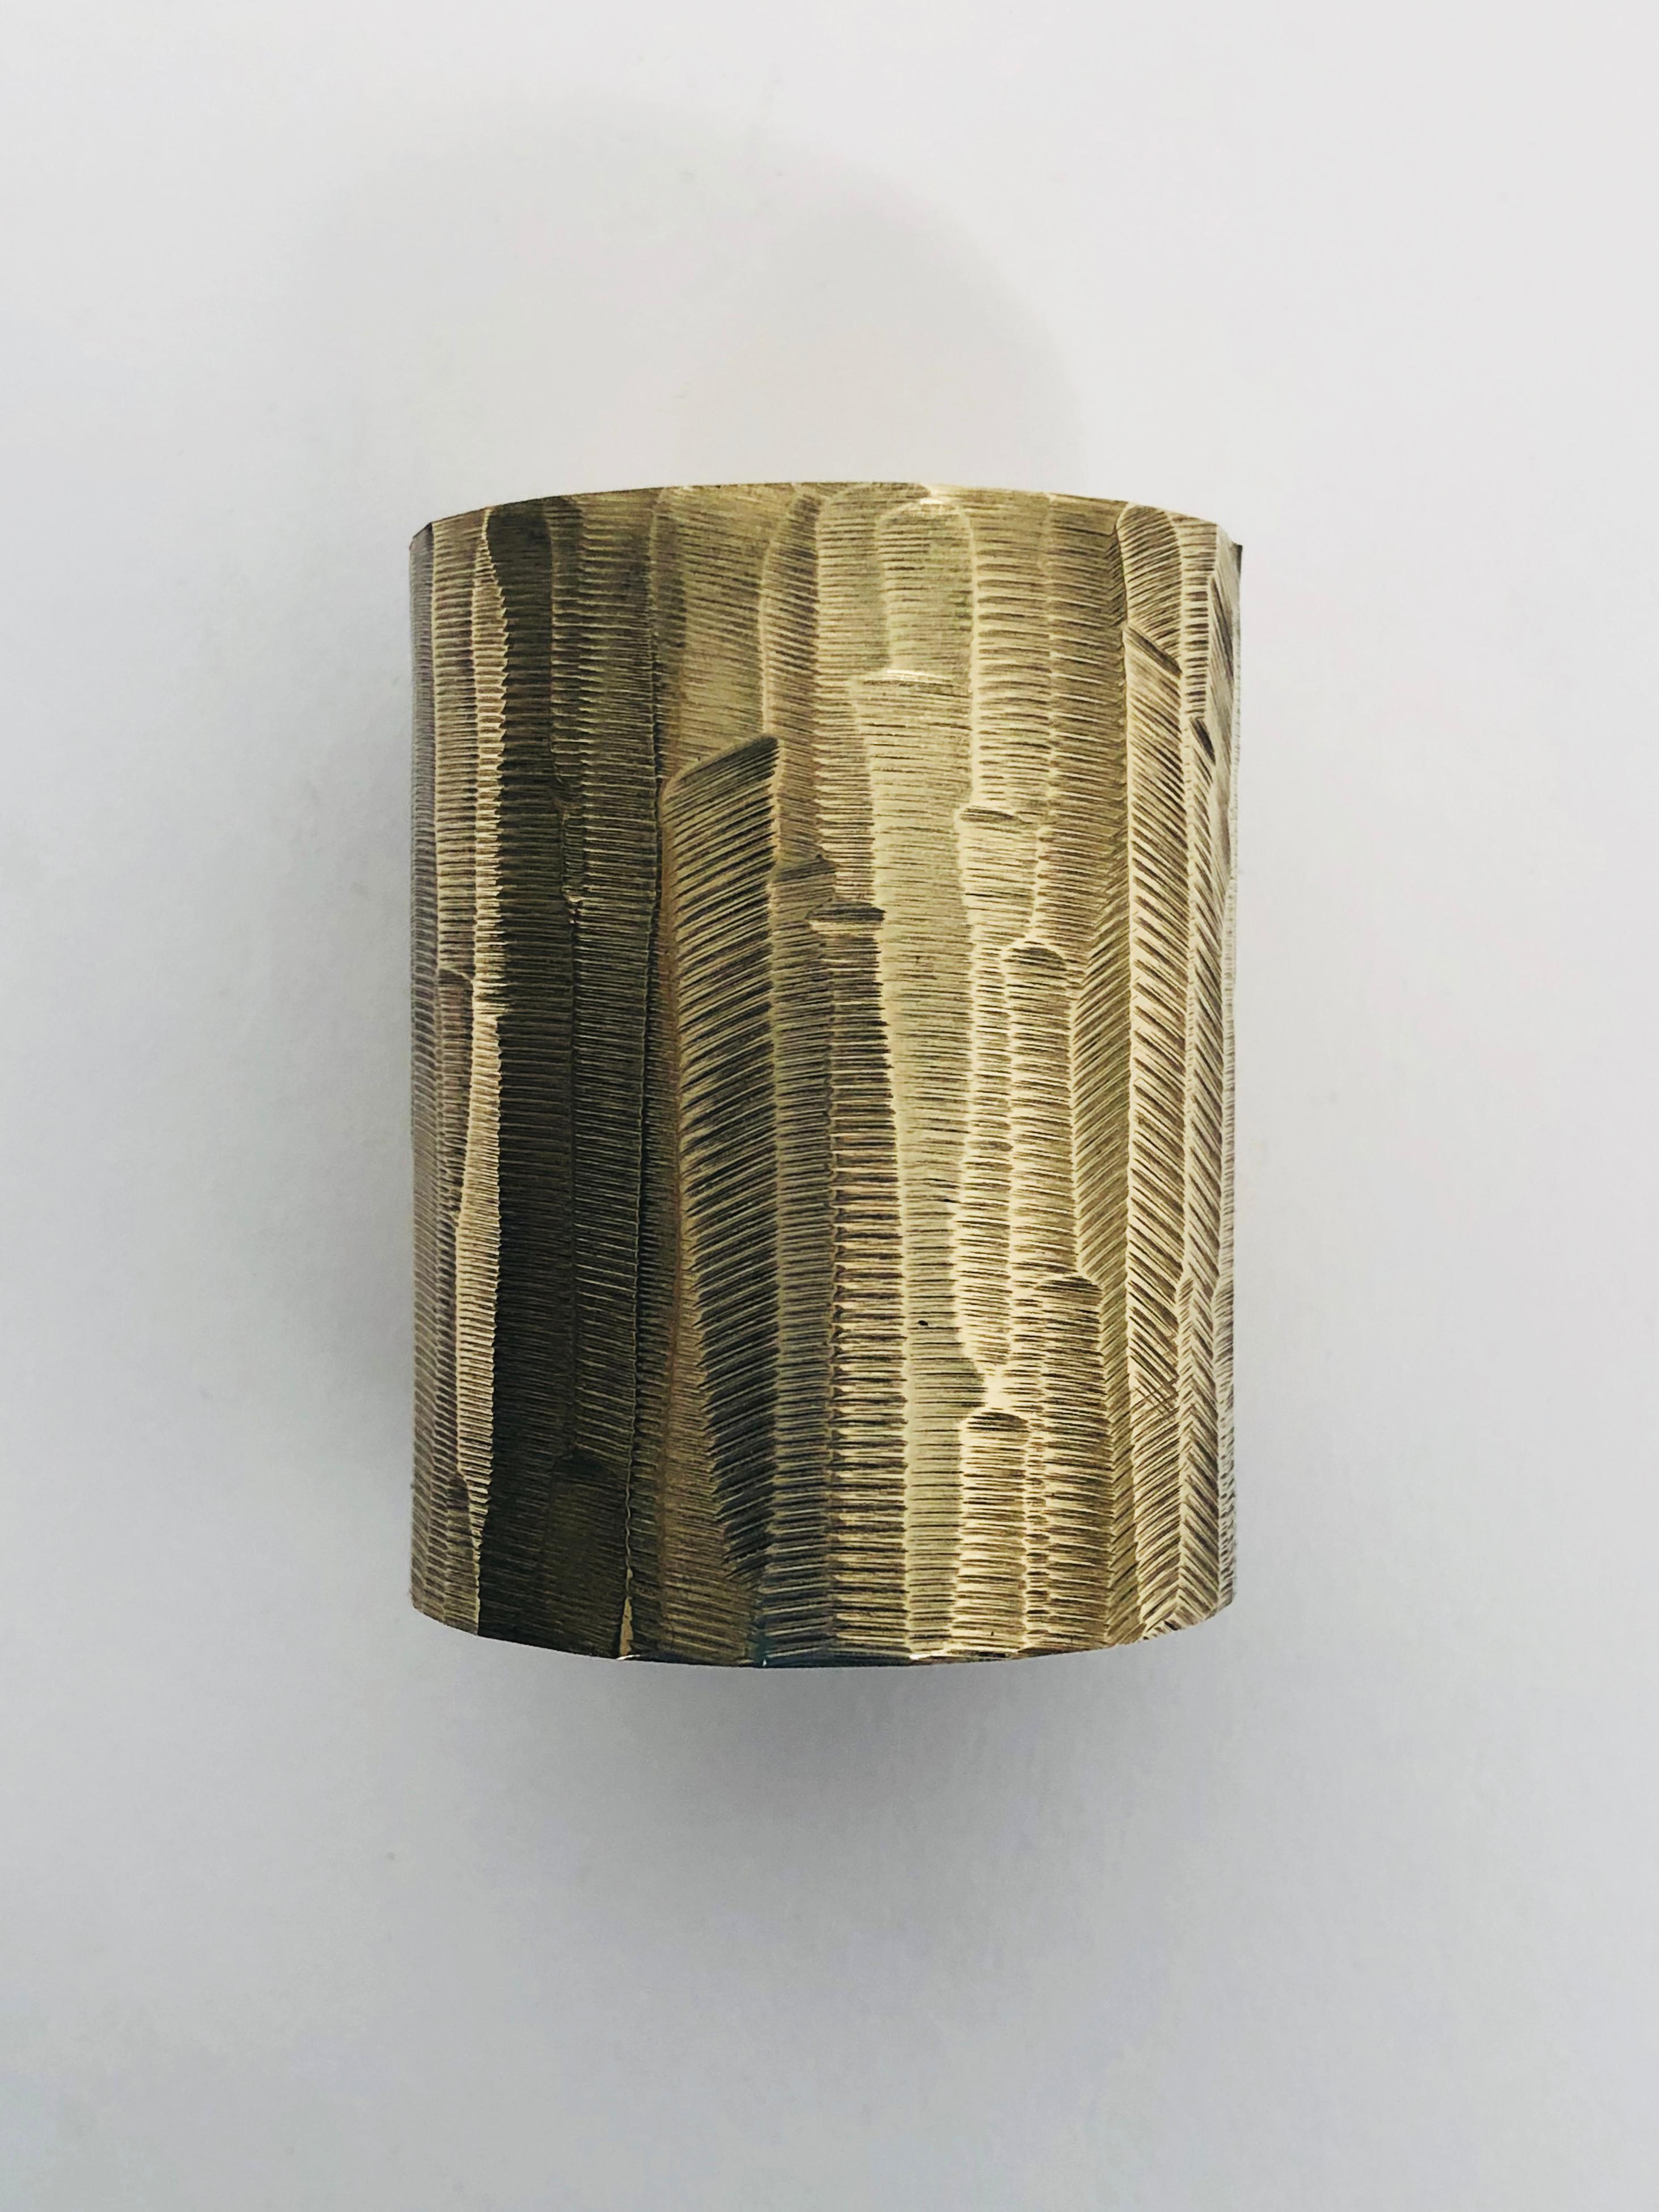 Solid brass sculpted candleholder Signed by William Guillon
Signed: William Guillon
Dimensions: Diameter 4 x height 5 cm
Diameter 3.5 x height 6 cm
Materials: Solid brass raw finish or patinated black, with polished edge
Hand-sculpted in